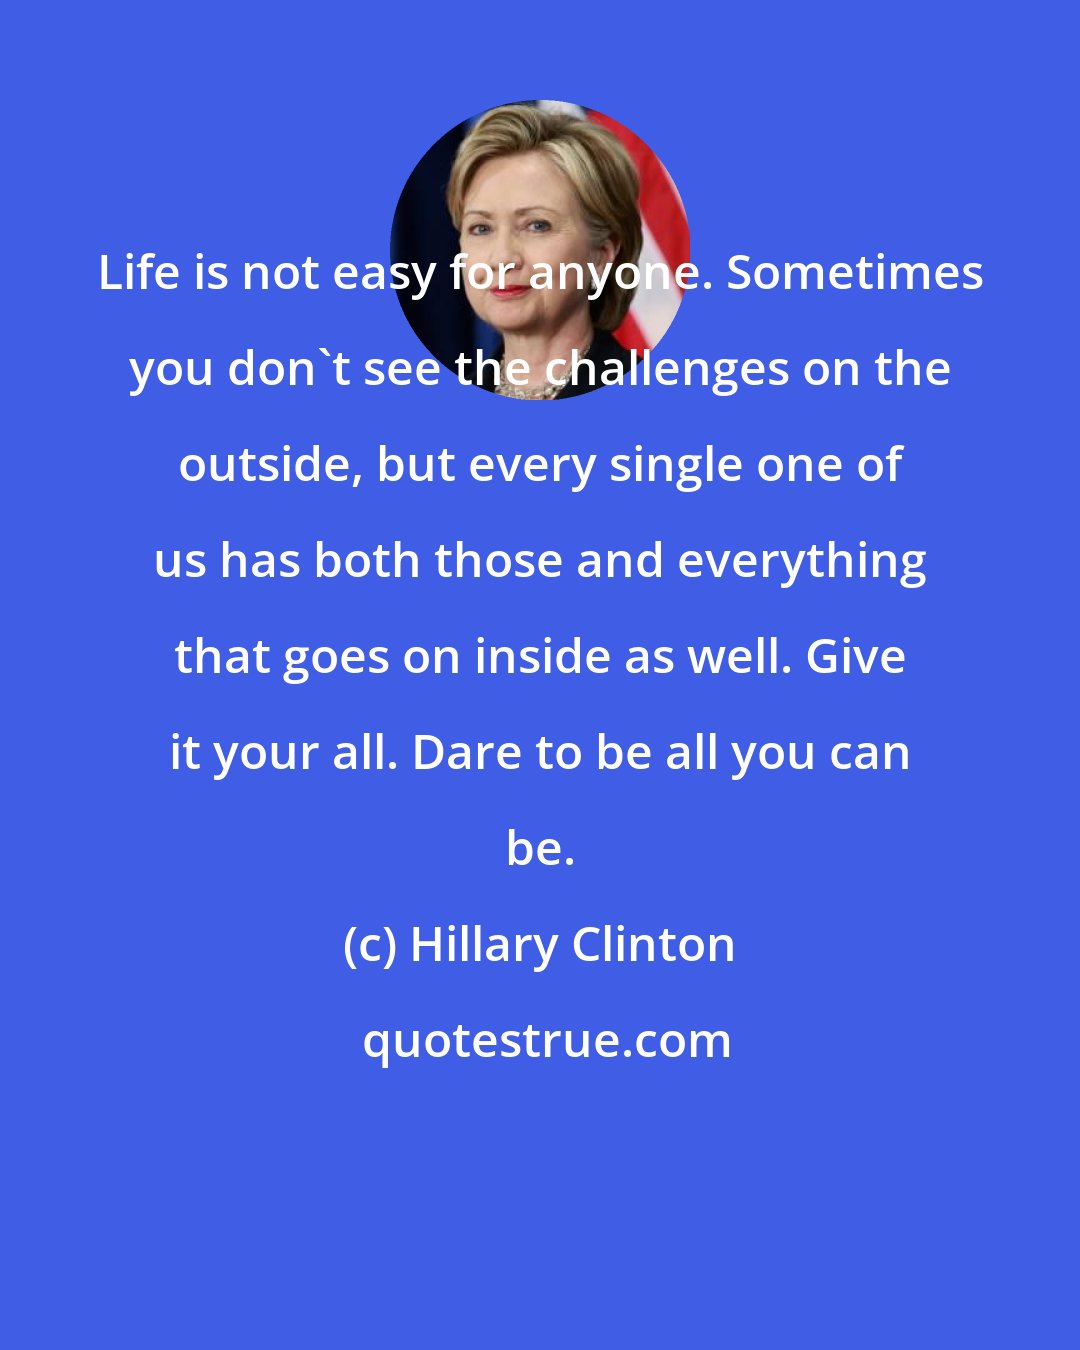 Hillary Clinton: Life is not easy for anyone. Sometimes you don't see the challenges on the outside, but every single one of us has both those and everything that goes on inside as well. Give it your all. Dare to be all you can be.